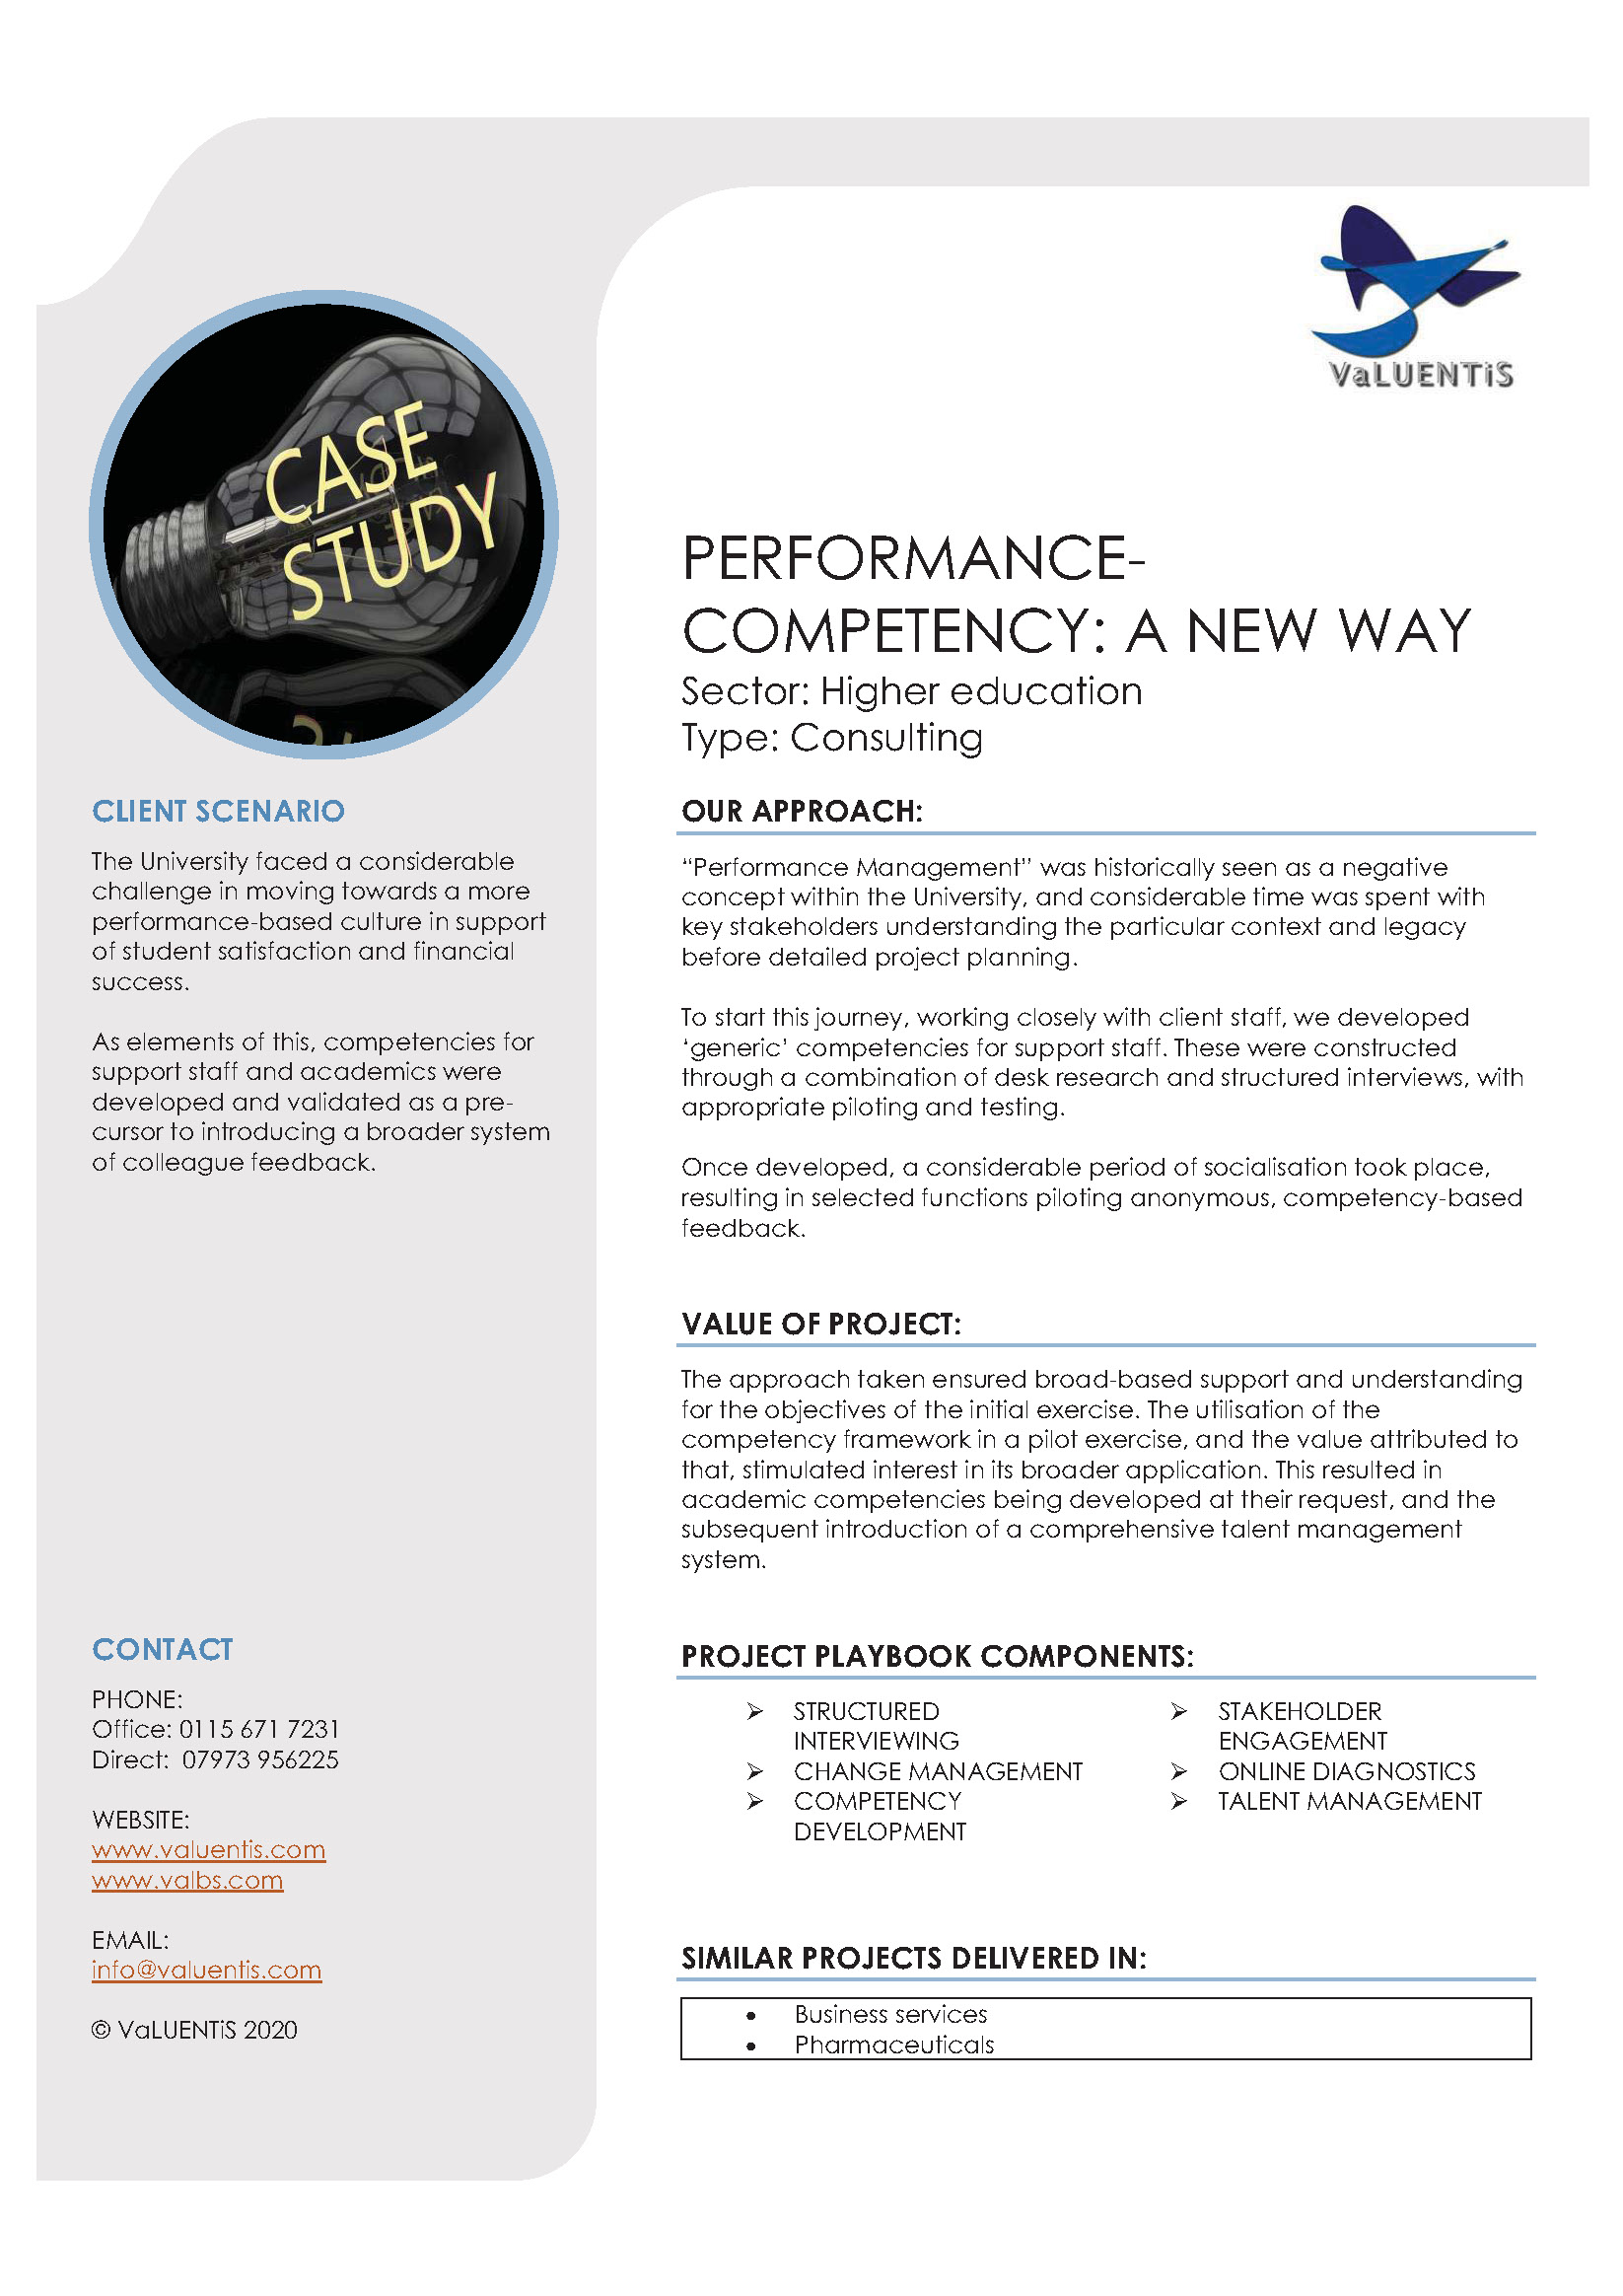 Performance Competency - A New Way